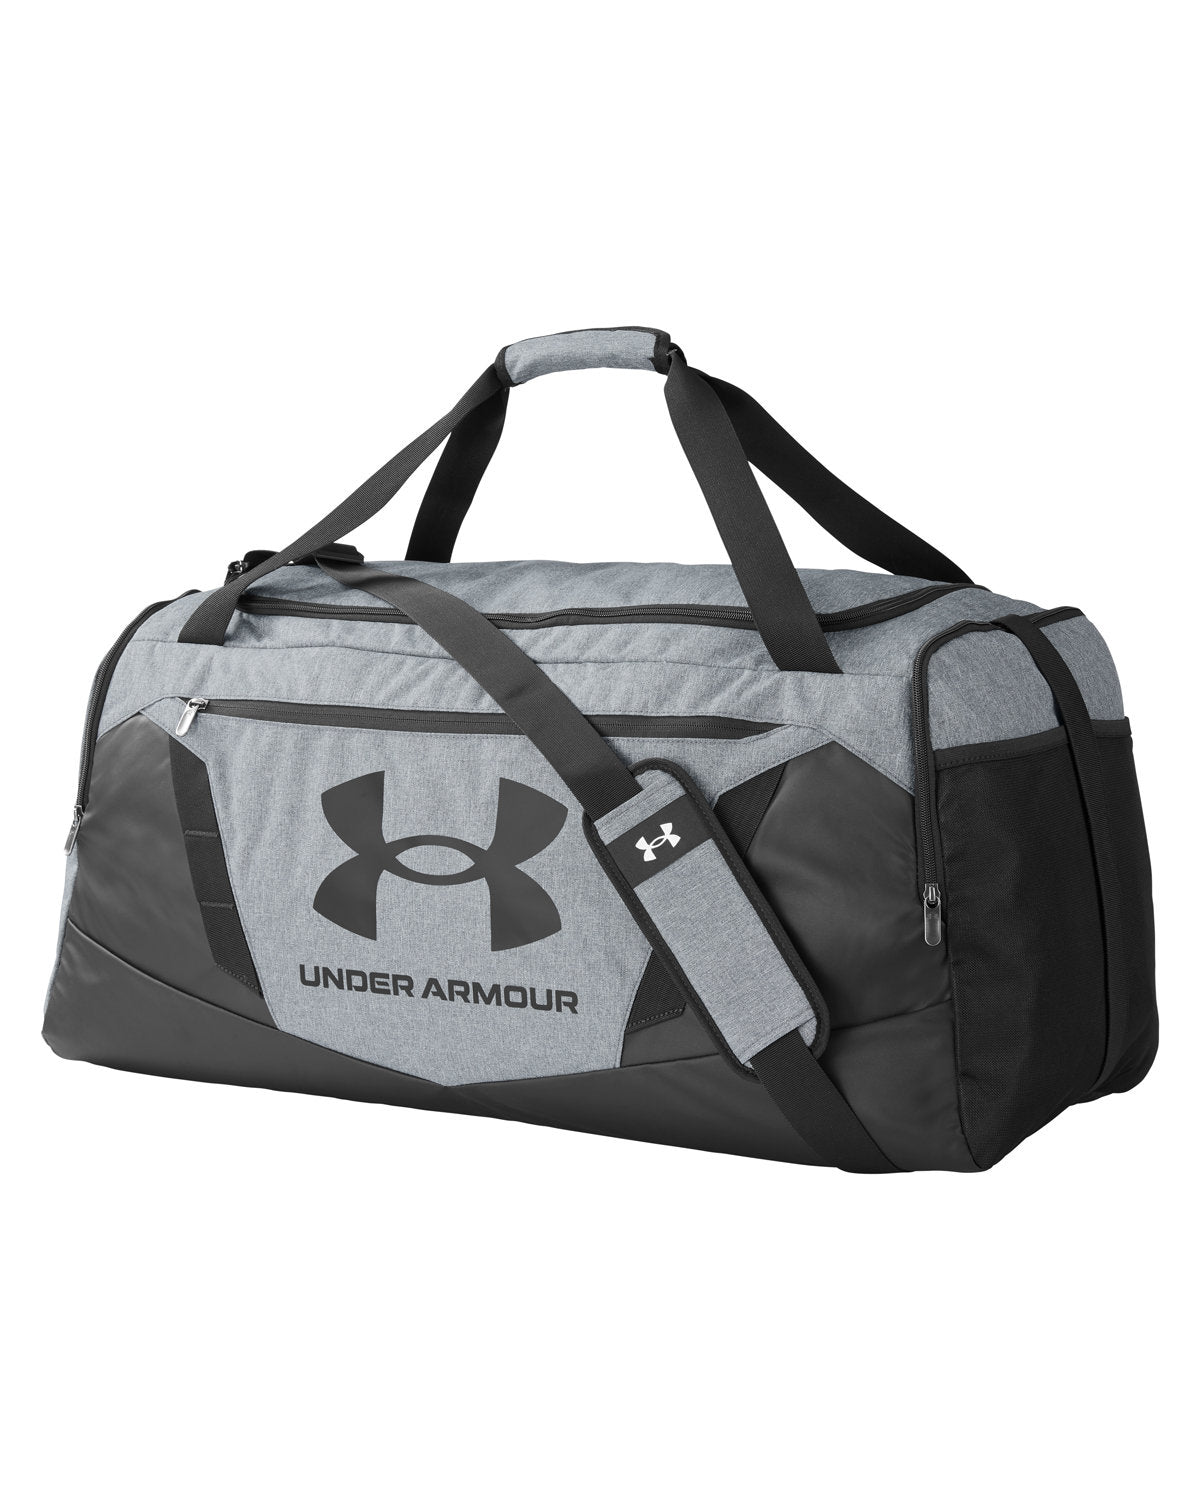 Under Armour Large Duffle (1369224)